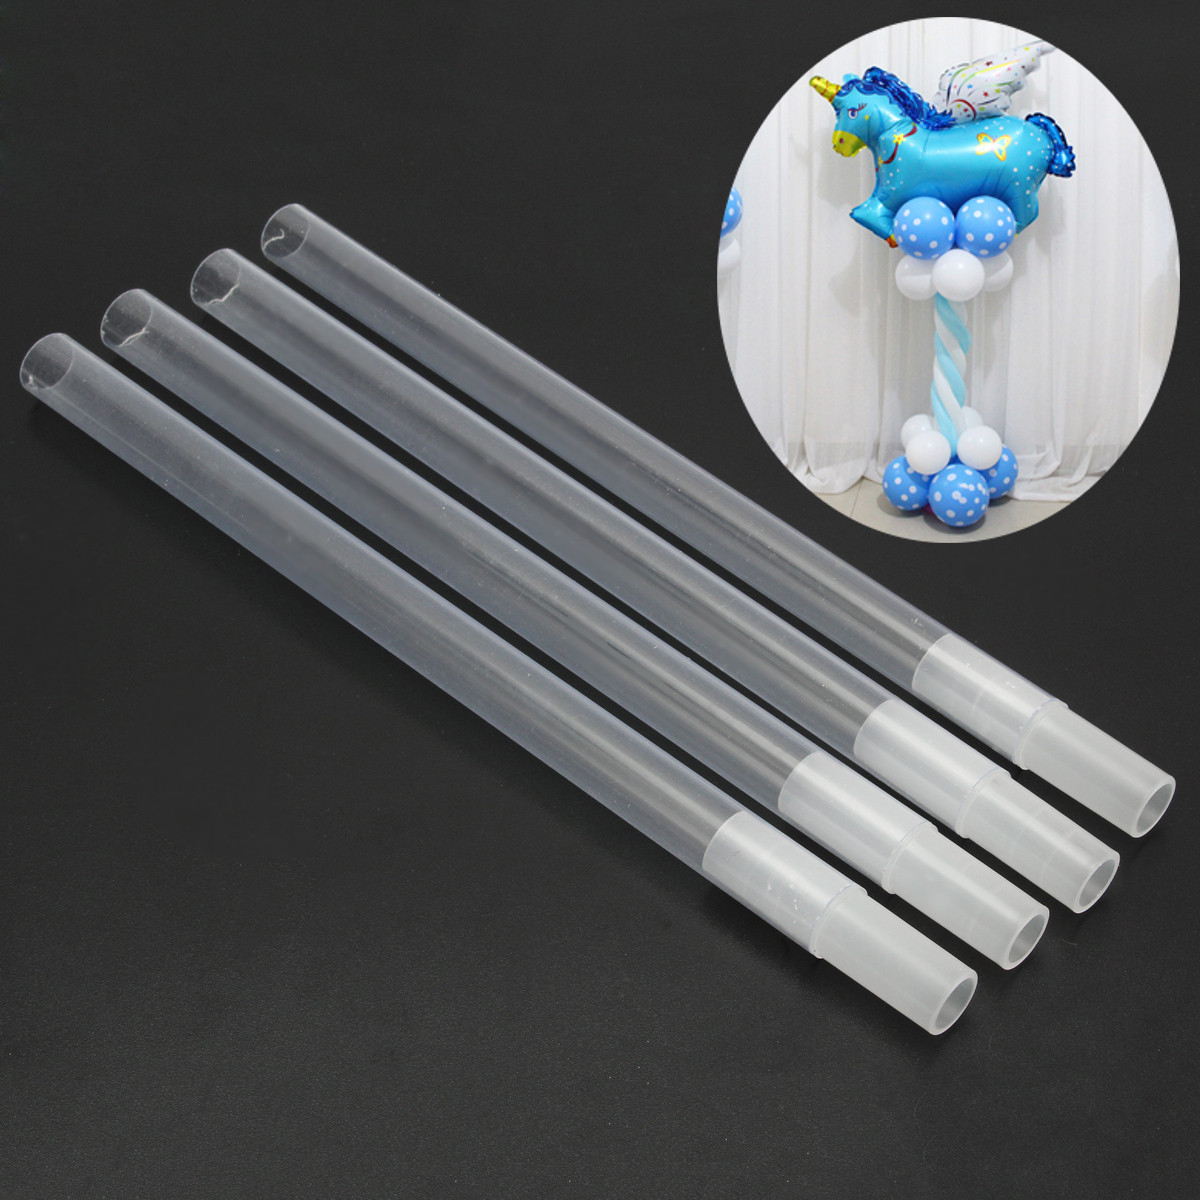 

4pcs Clear Plastic Sticks Pole For Balloon Arch Column Base Stand Wedding Party Decorations